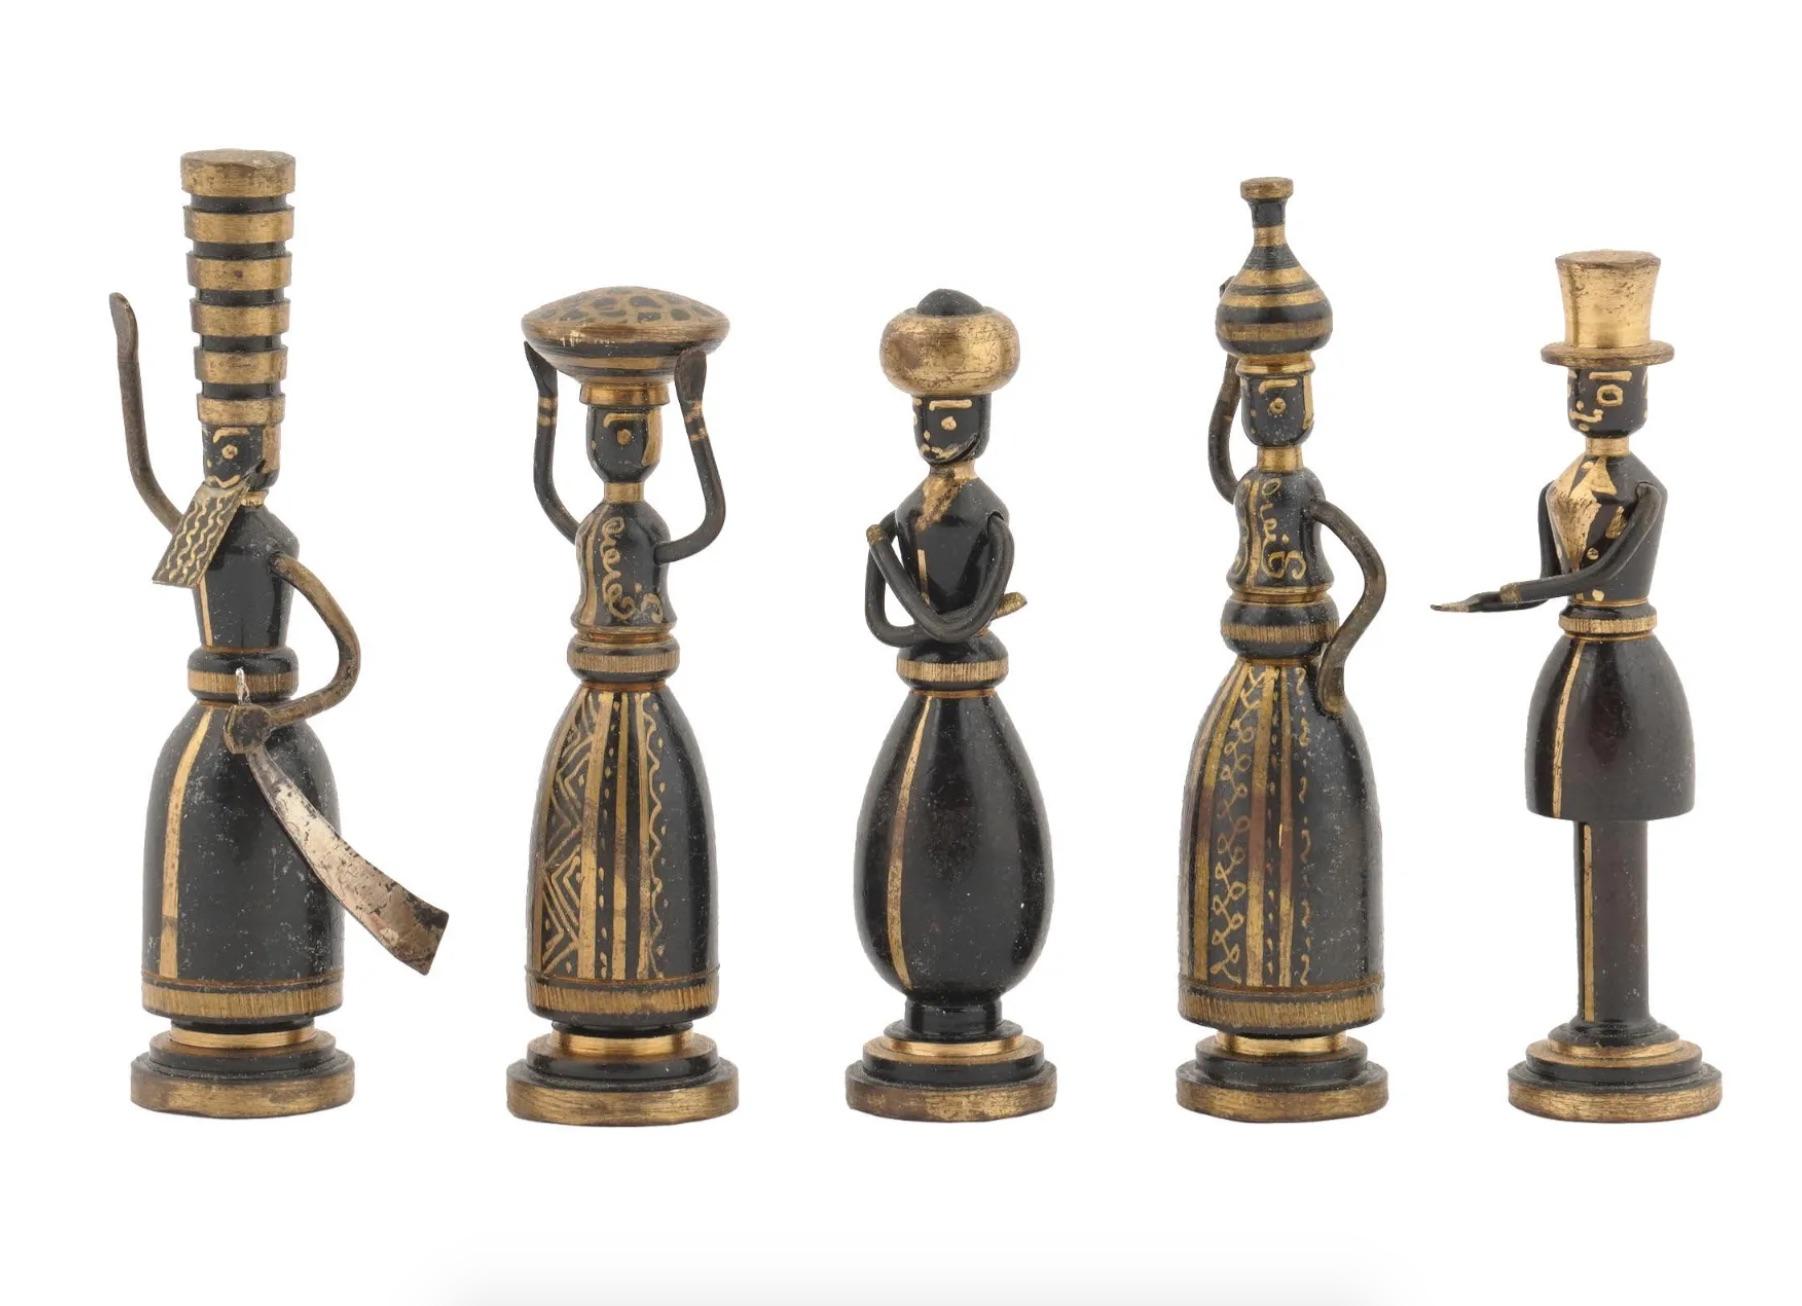 A collection of five Israeli miniature patinated brass figurines by Hans Teppich. The figurines depict Biblical women, Esther, Shulamith, Salome, Deborah. Each figurine is marked with a stamp on the bottom. Hans Teppich, Israeli, German, 1904 to